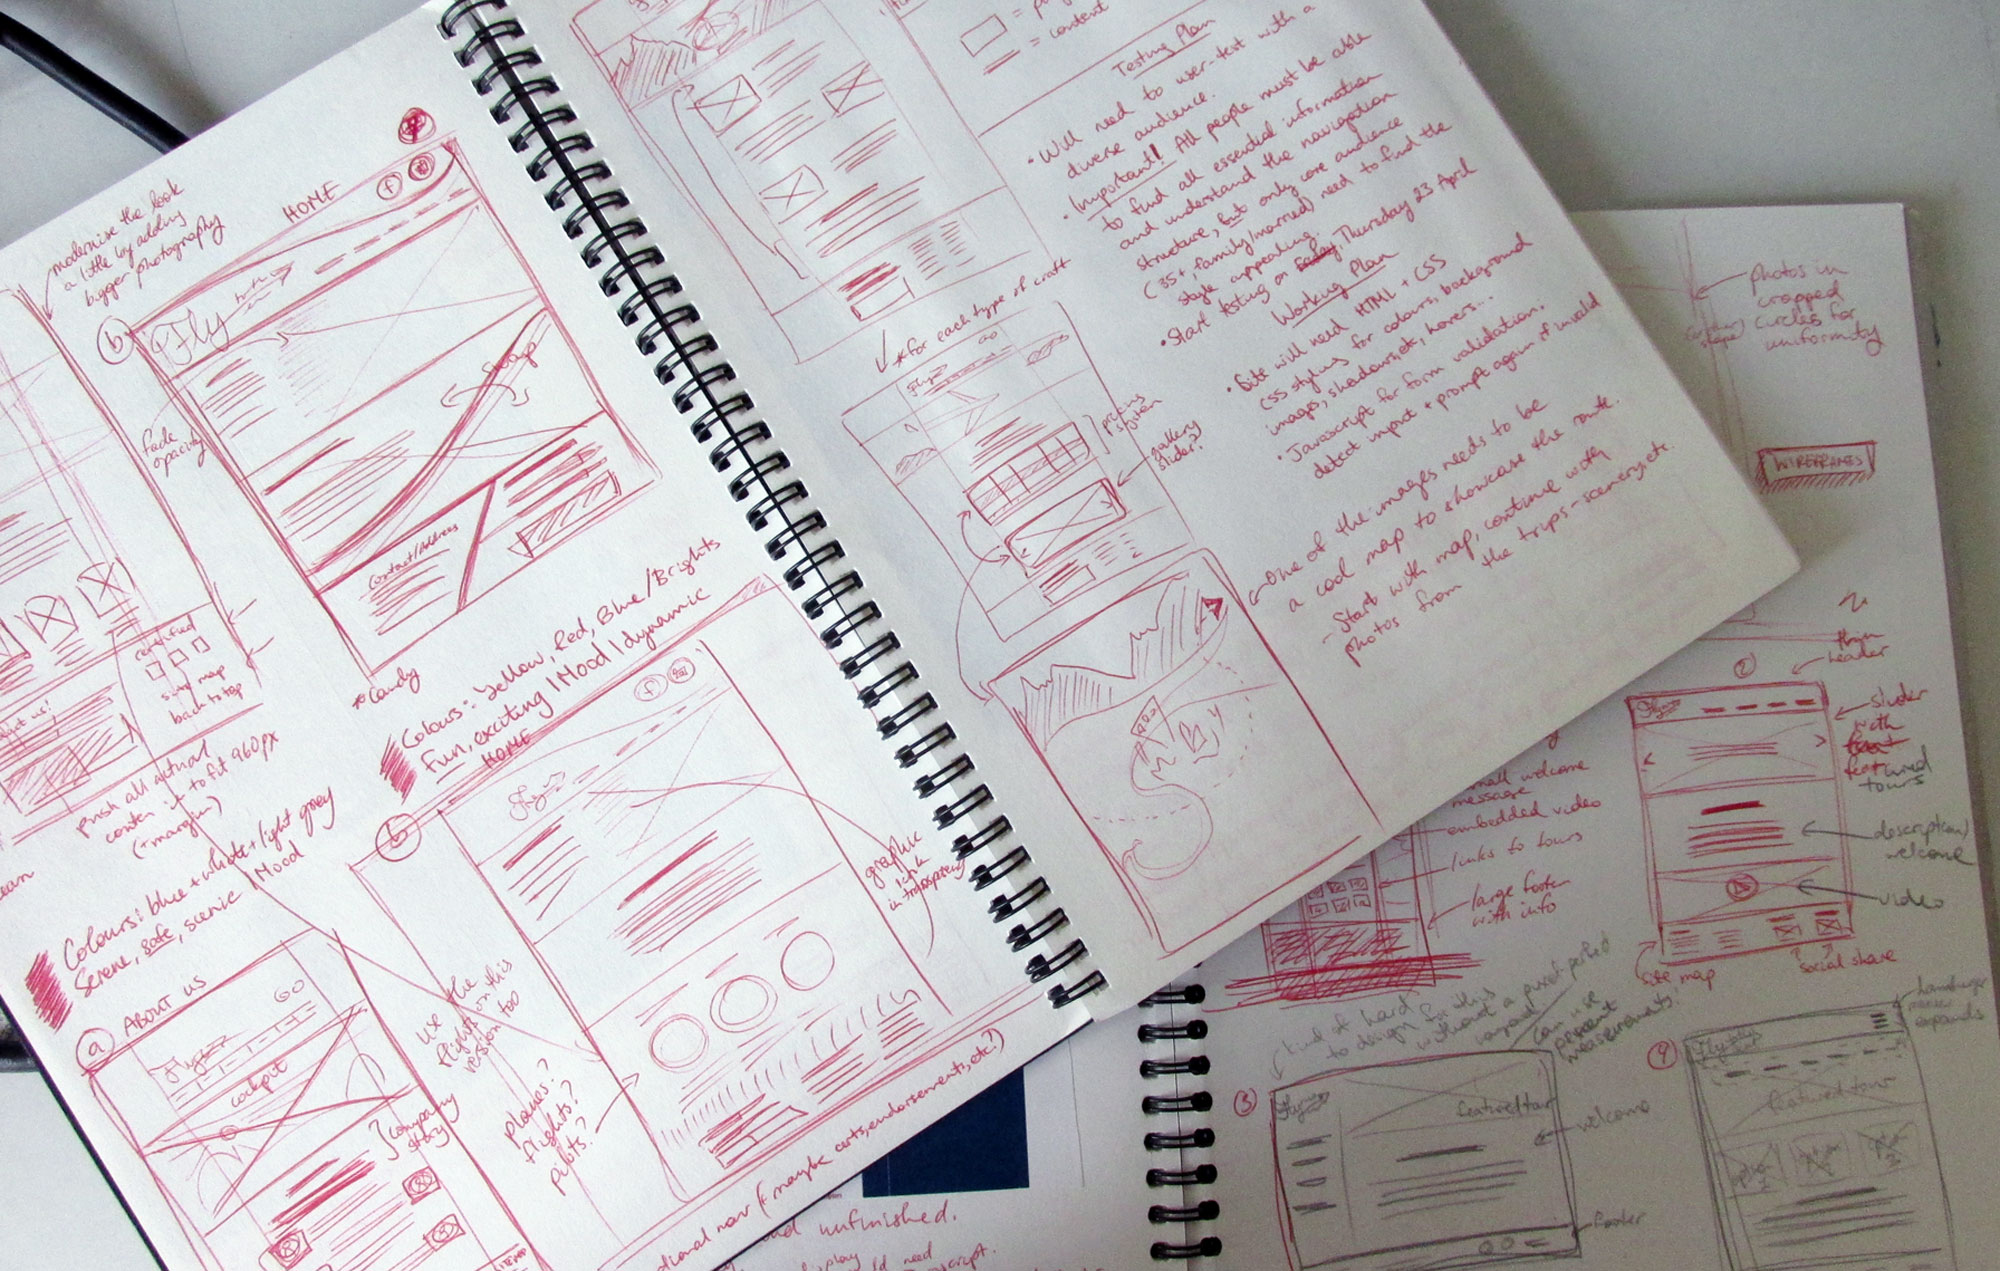 Thumbnail drawings of the site.